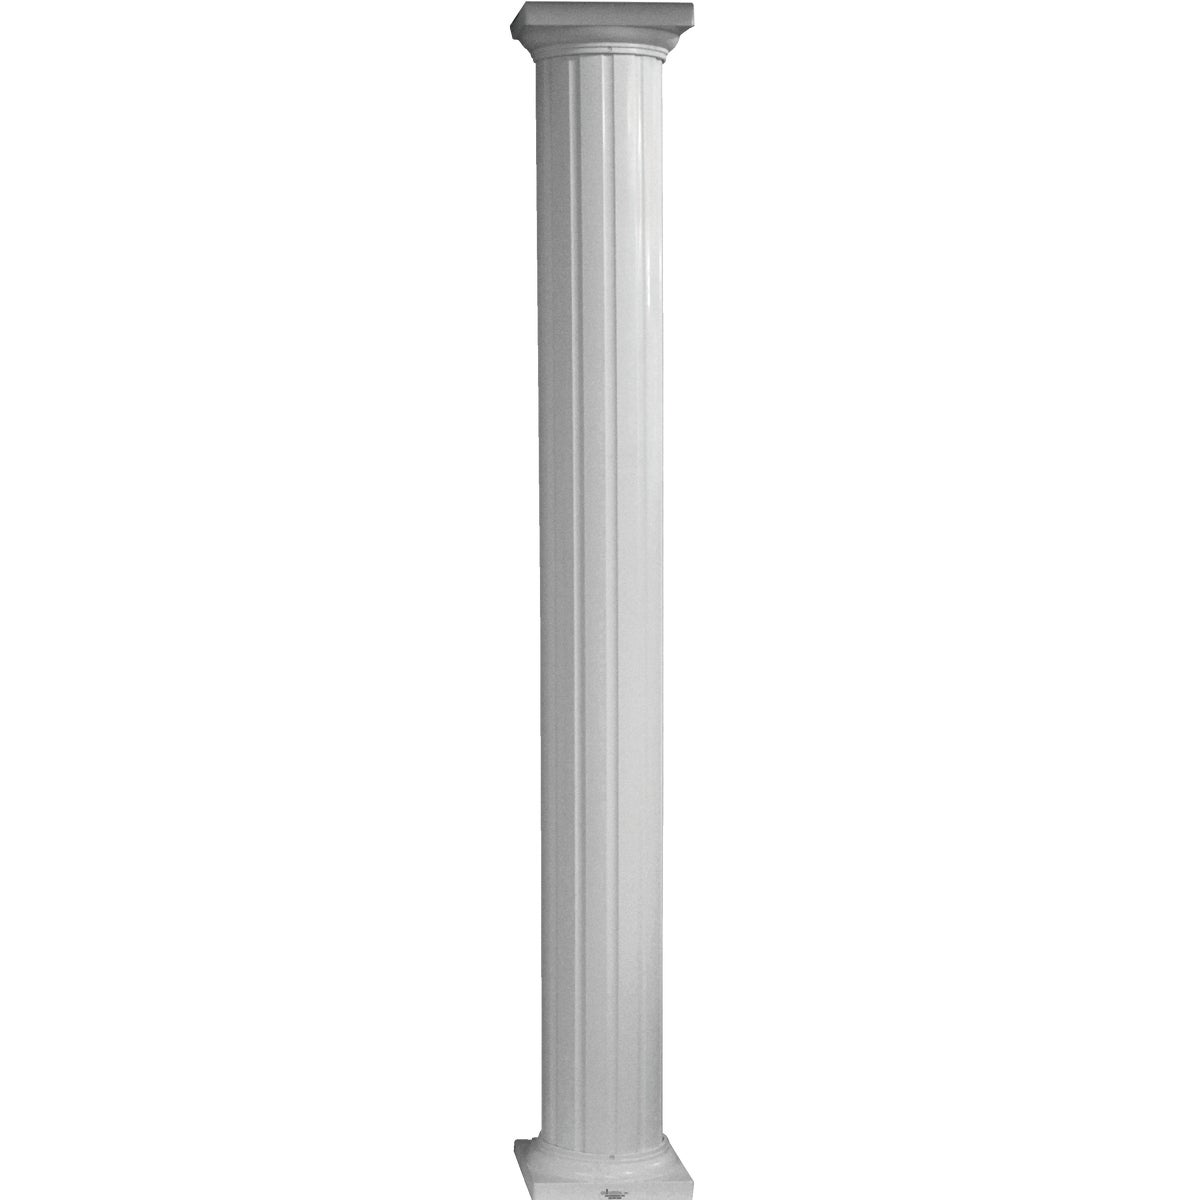 Item 163457, Round fluted columns. Individually wrapped for protection.